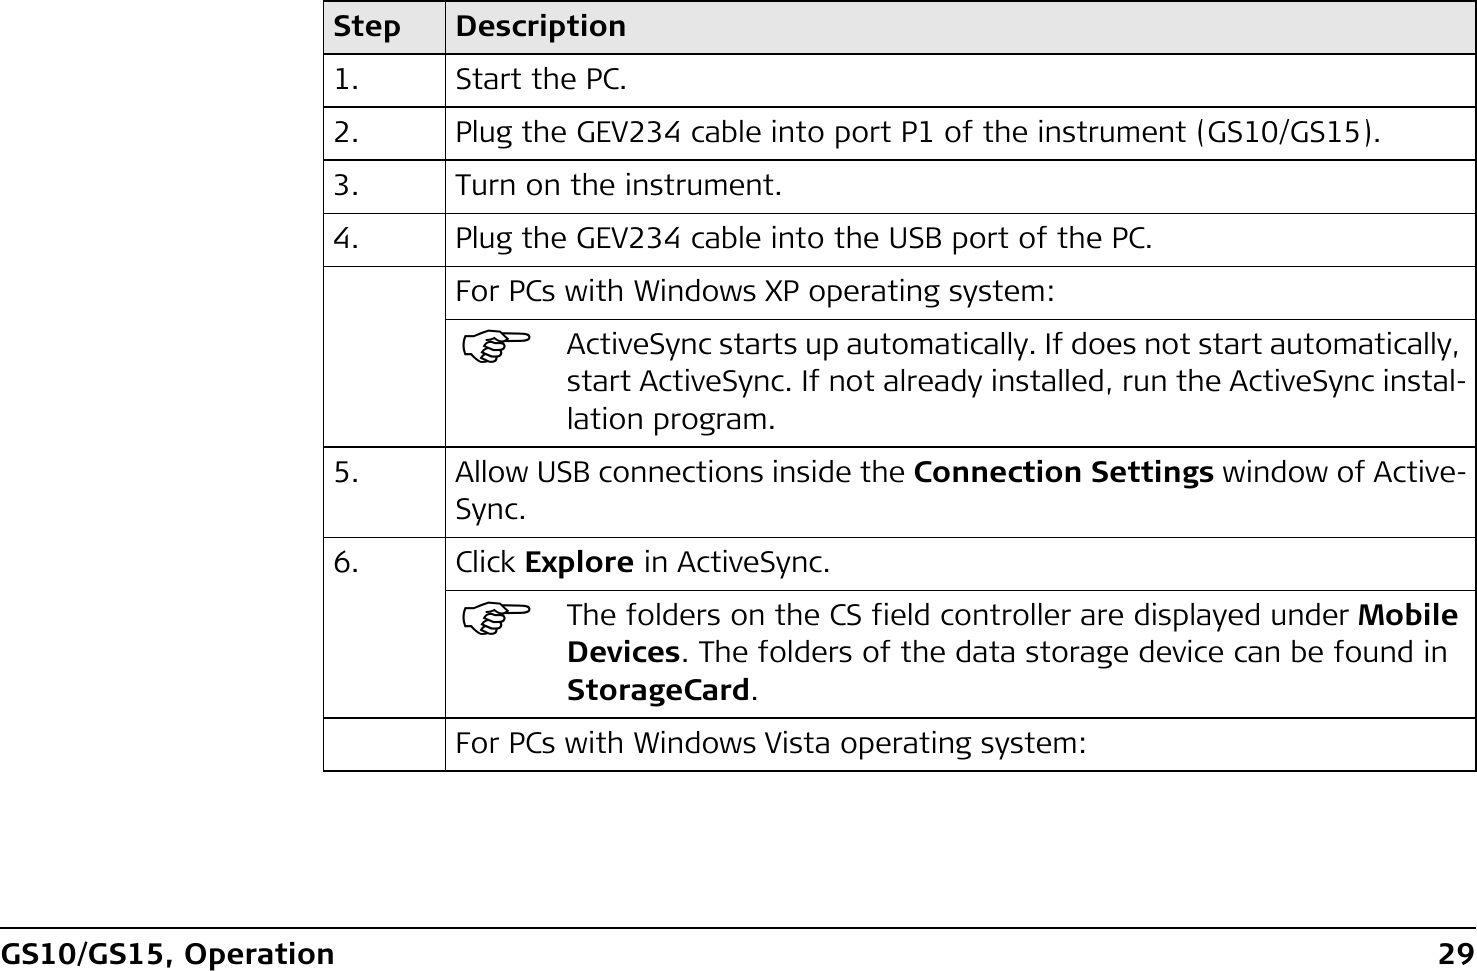 GS10/GS15, Operation 29Step Description1. Start the PC.2. Plug the GEV234 cable into port P1 of the instrument (GS10/GS15).3. Turn on the instrument.4. Plug the GEV234 cable into the USB port of the PC.For PCs with Windows XP operating system:)ActiveSync starts up automatically. If does not start automatically, start ActiveSync. If not already installed, run the ActiveSync instal-lation program.5. Allow USB connections inside the Connection Settings window of Active-Sync.6. Click Explore in ActiveSync.)The folders on the CS field controller are displayed under Mobile Devices. The folders of the data storage device can be found in StorageCard.For PCs with Windows Vista operating system: